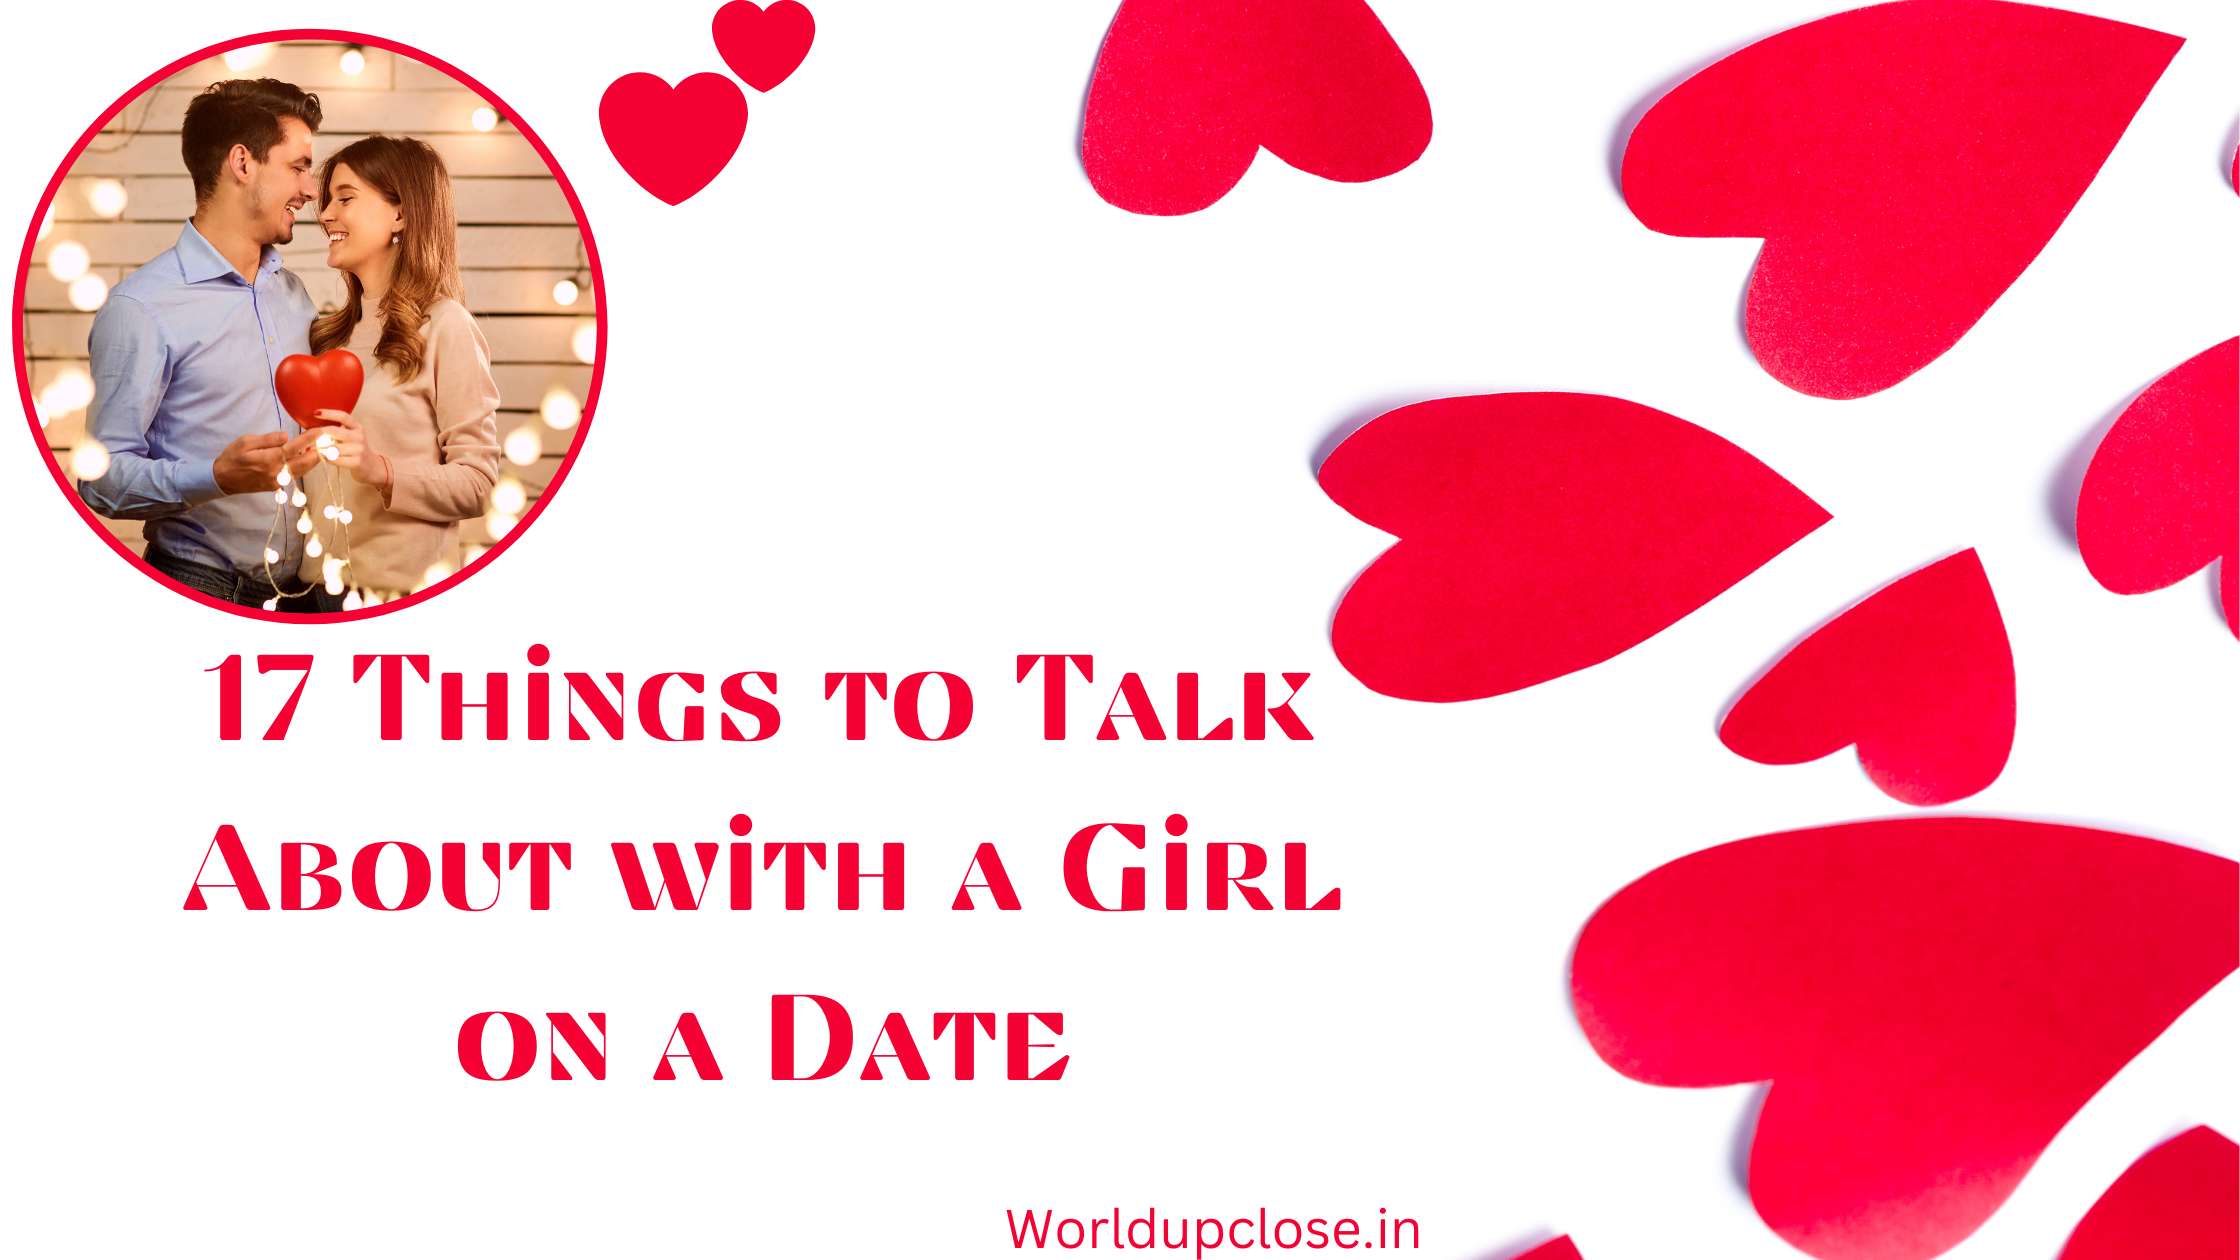 17 Things to Talk About with a Girl on a Date 51